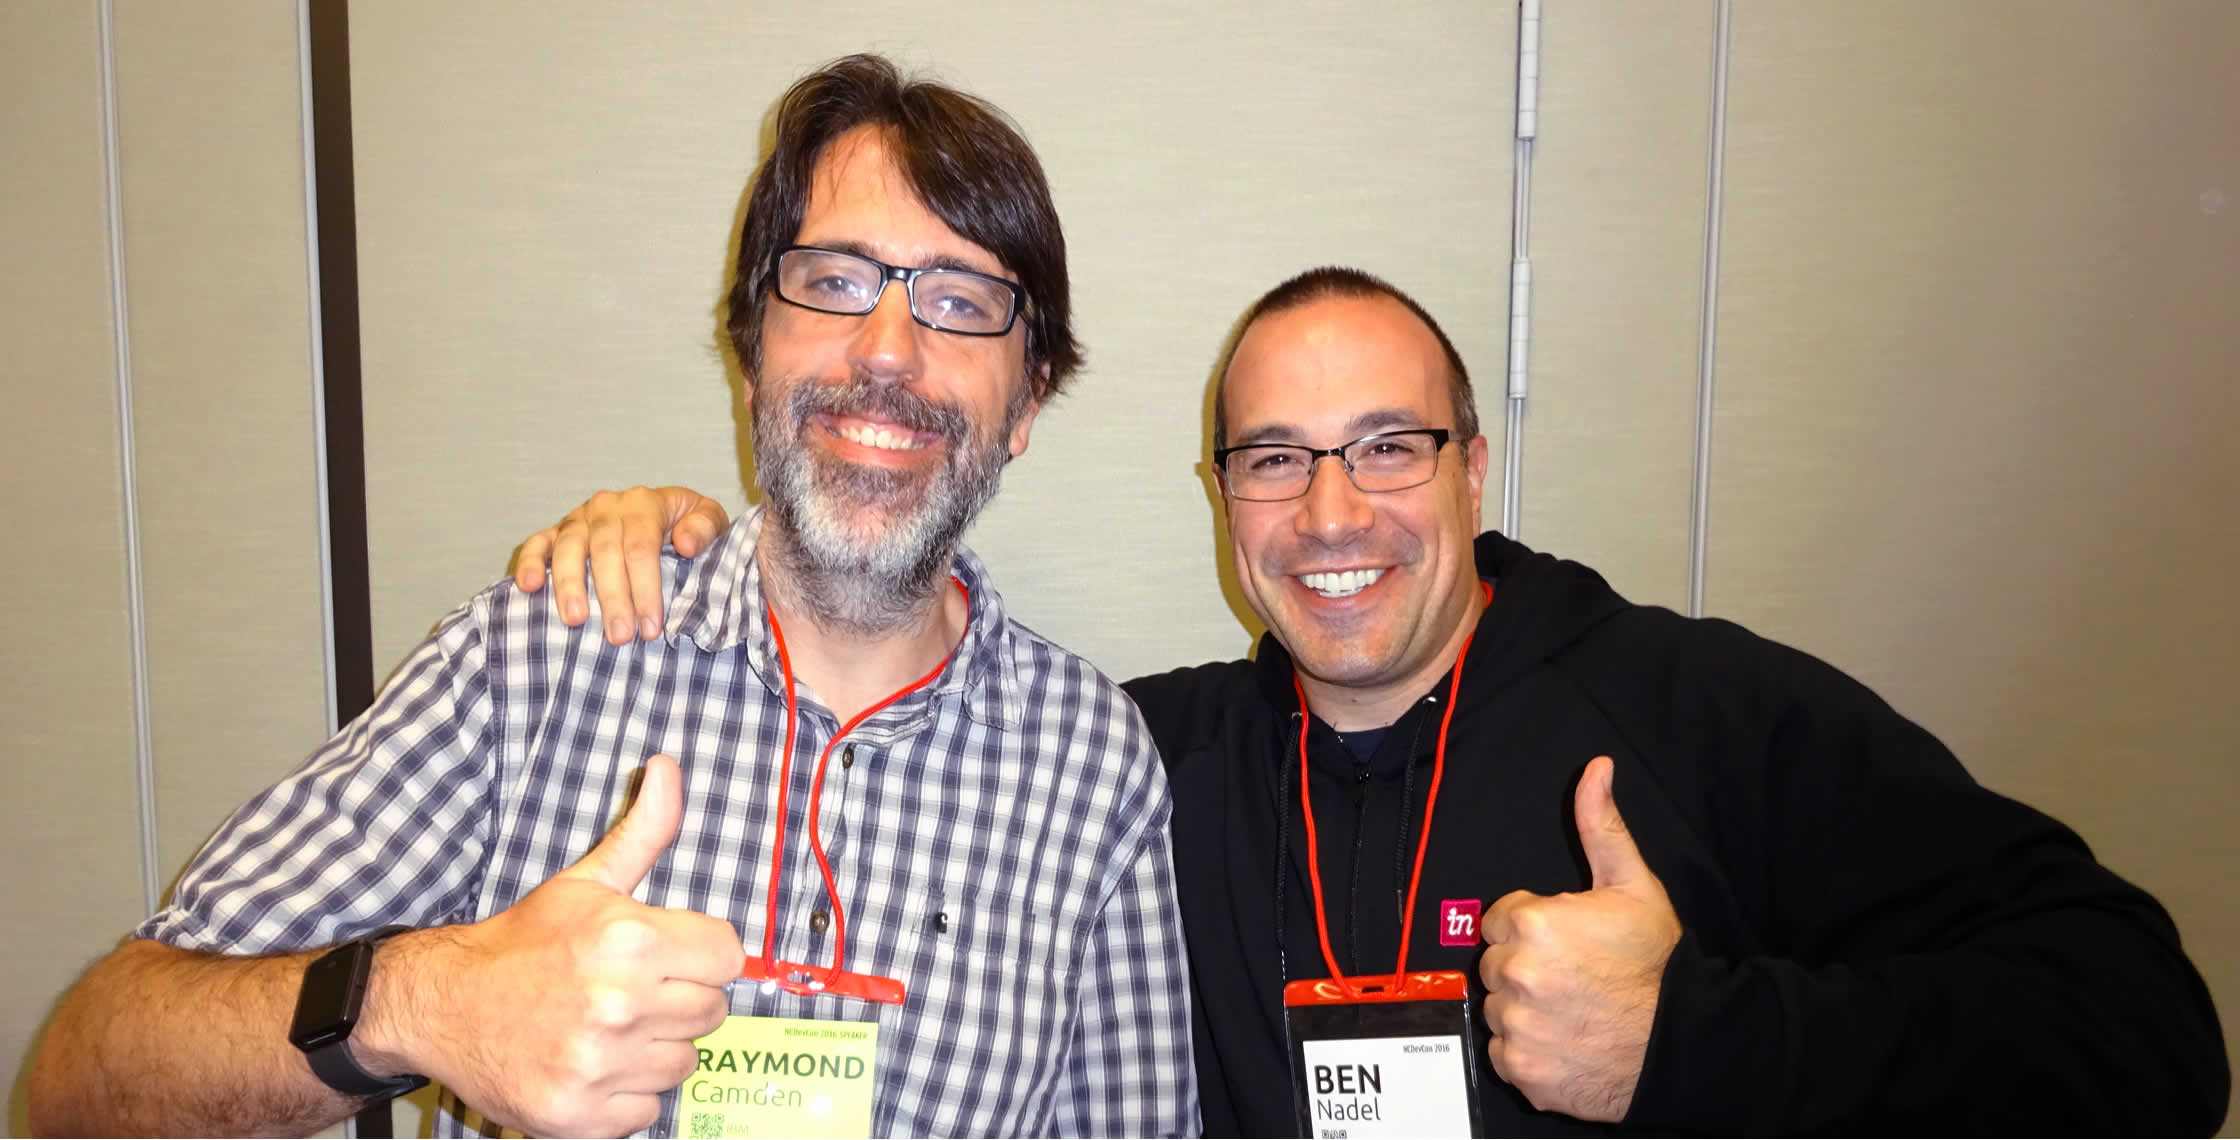 Ben Nadel at NCDevCon 2016 (Raleigh, NC) with: Ray Camden